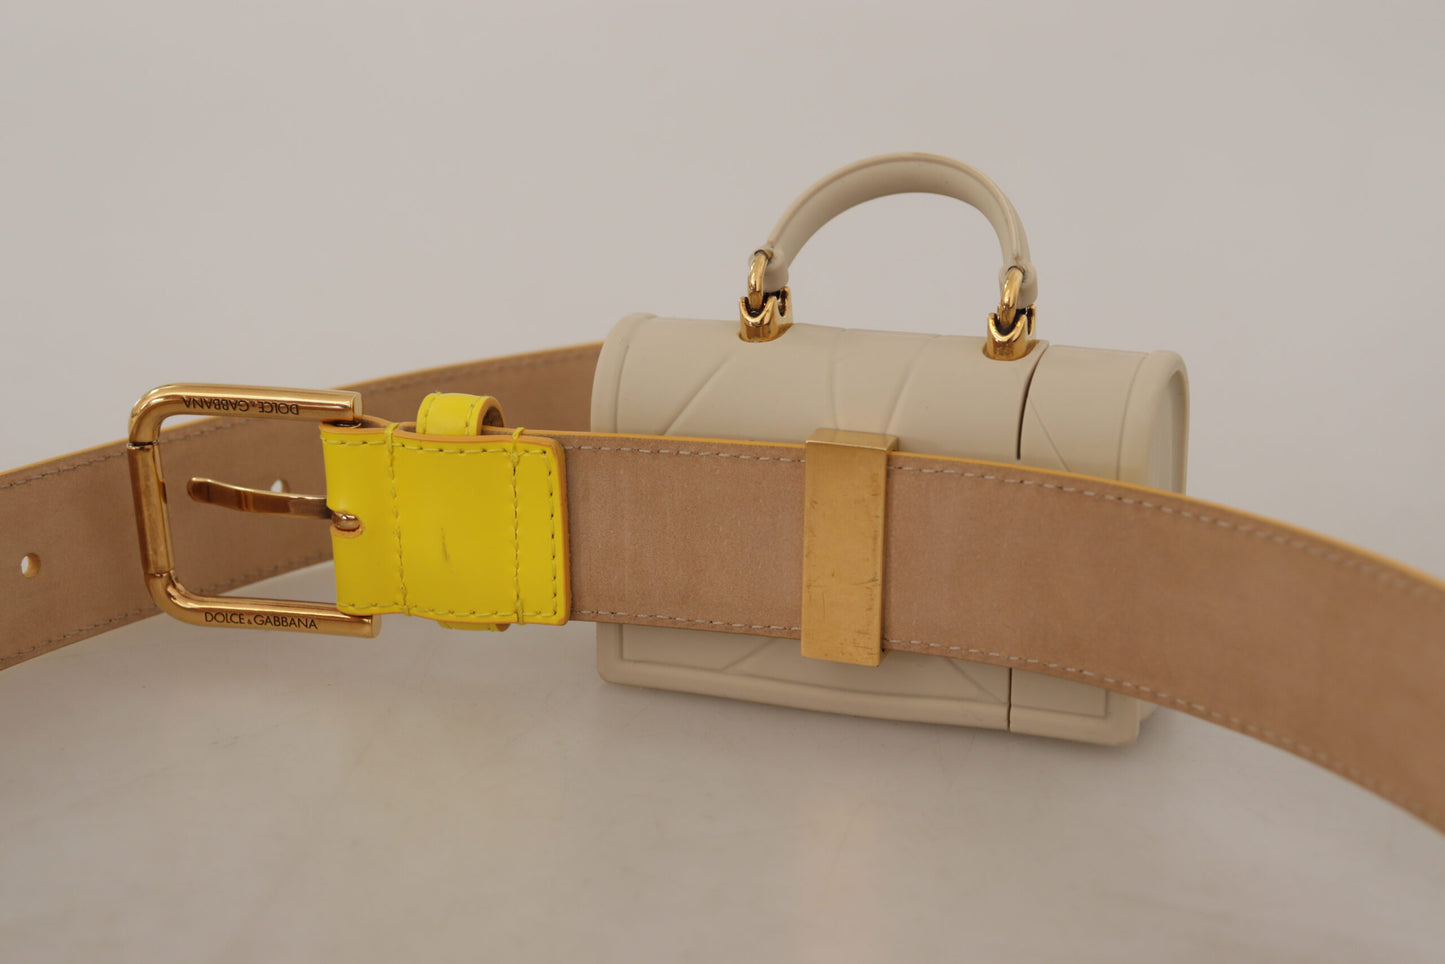 Chic Yellow Leather Belt with Headphone Case